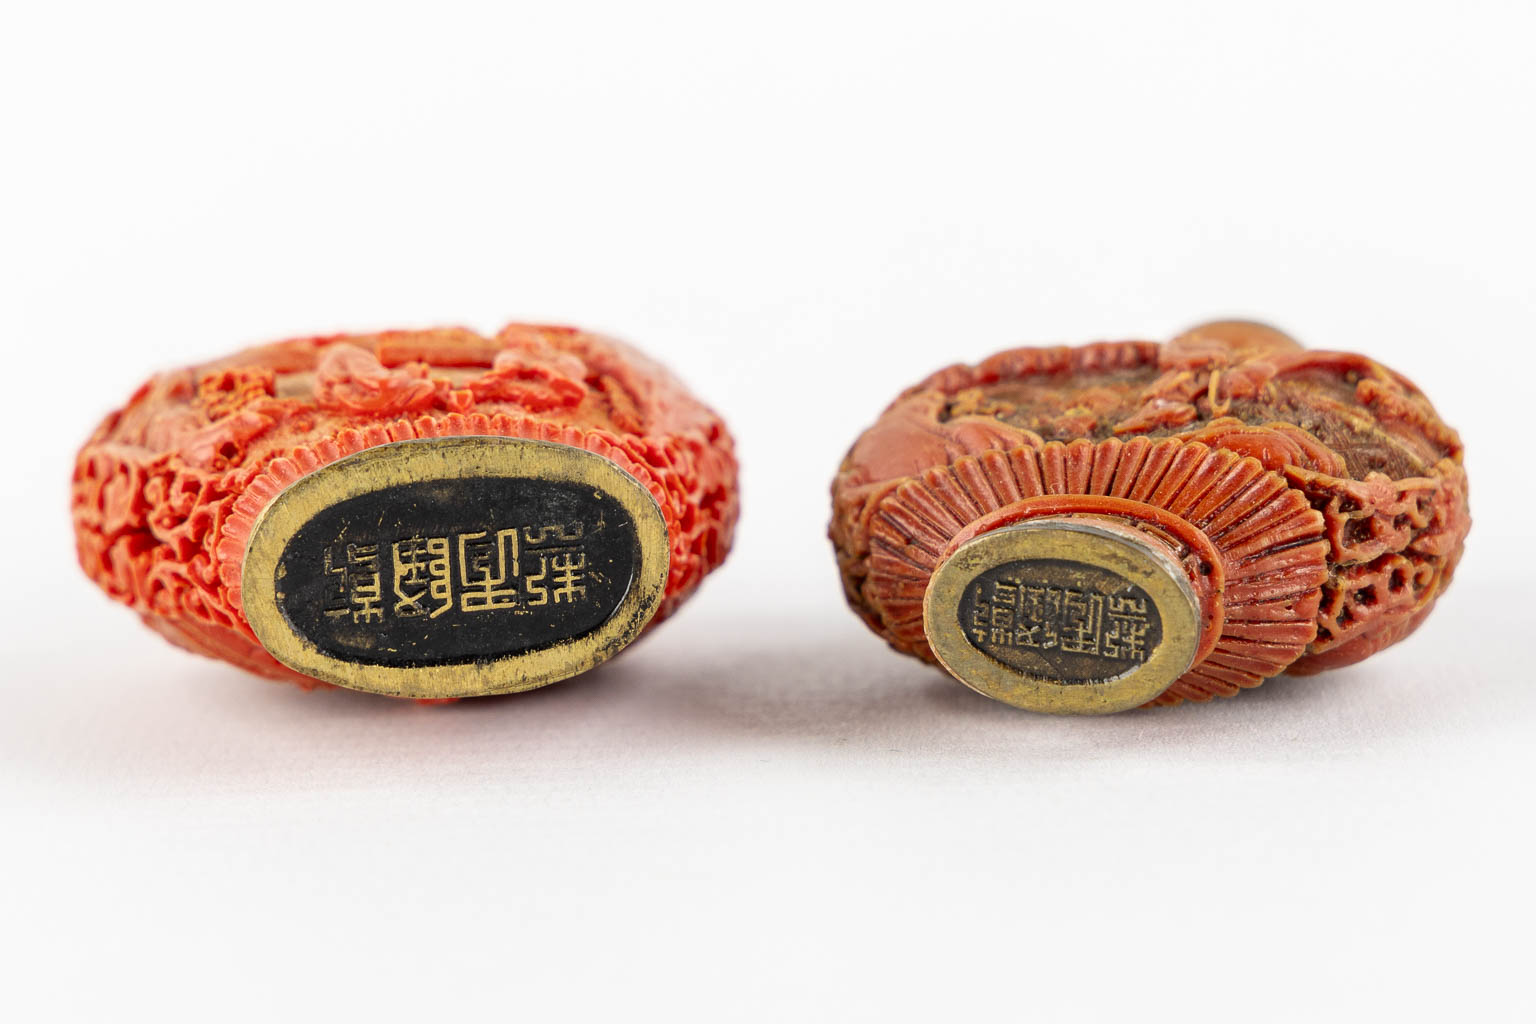 Two Snuff boxes, China, sculptured coral. Late Qing Dynasty. (H:7,2 cm) - Image 7 of 9